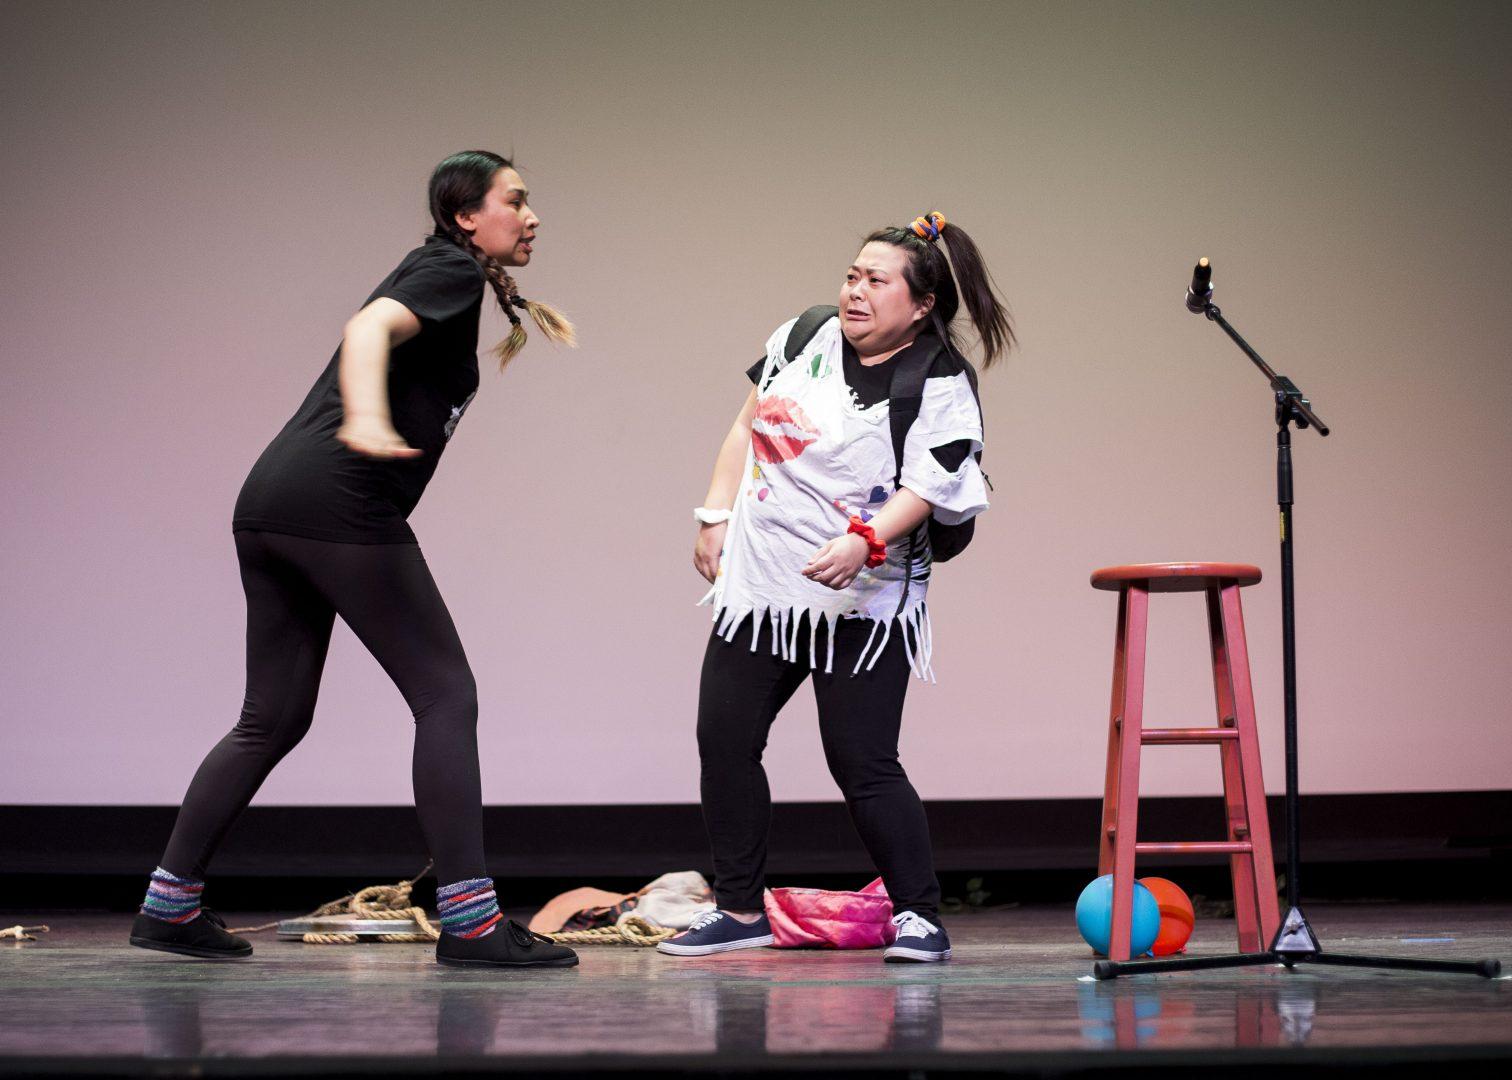 Saymoukda Vongsay and May Lee Yang re-enacts a memory from Yang’s childhood about dressing up as Madonna to school during their comedy show in the Satellite Student Union on March 11, 2018. (Ram Reyes/The Collegian)